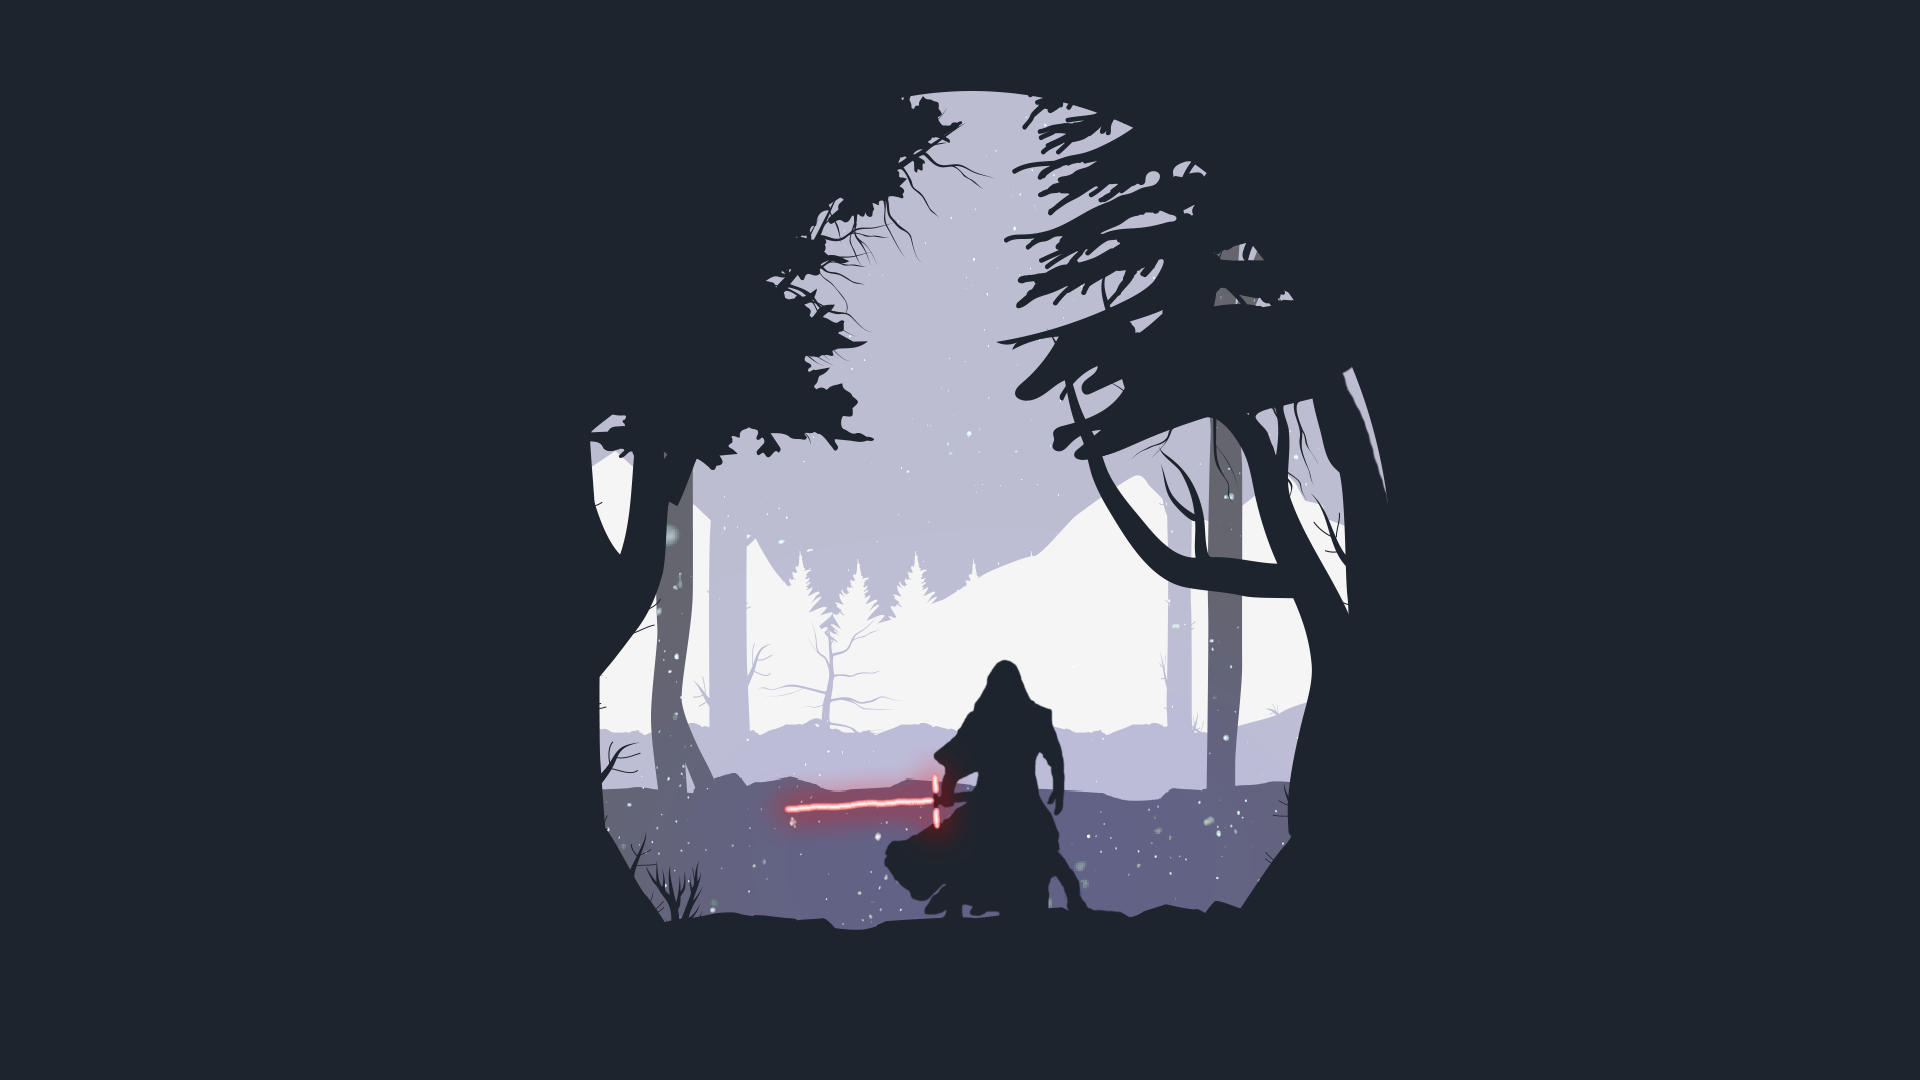 Star Wars Backgrounds (Mobile, iPad)